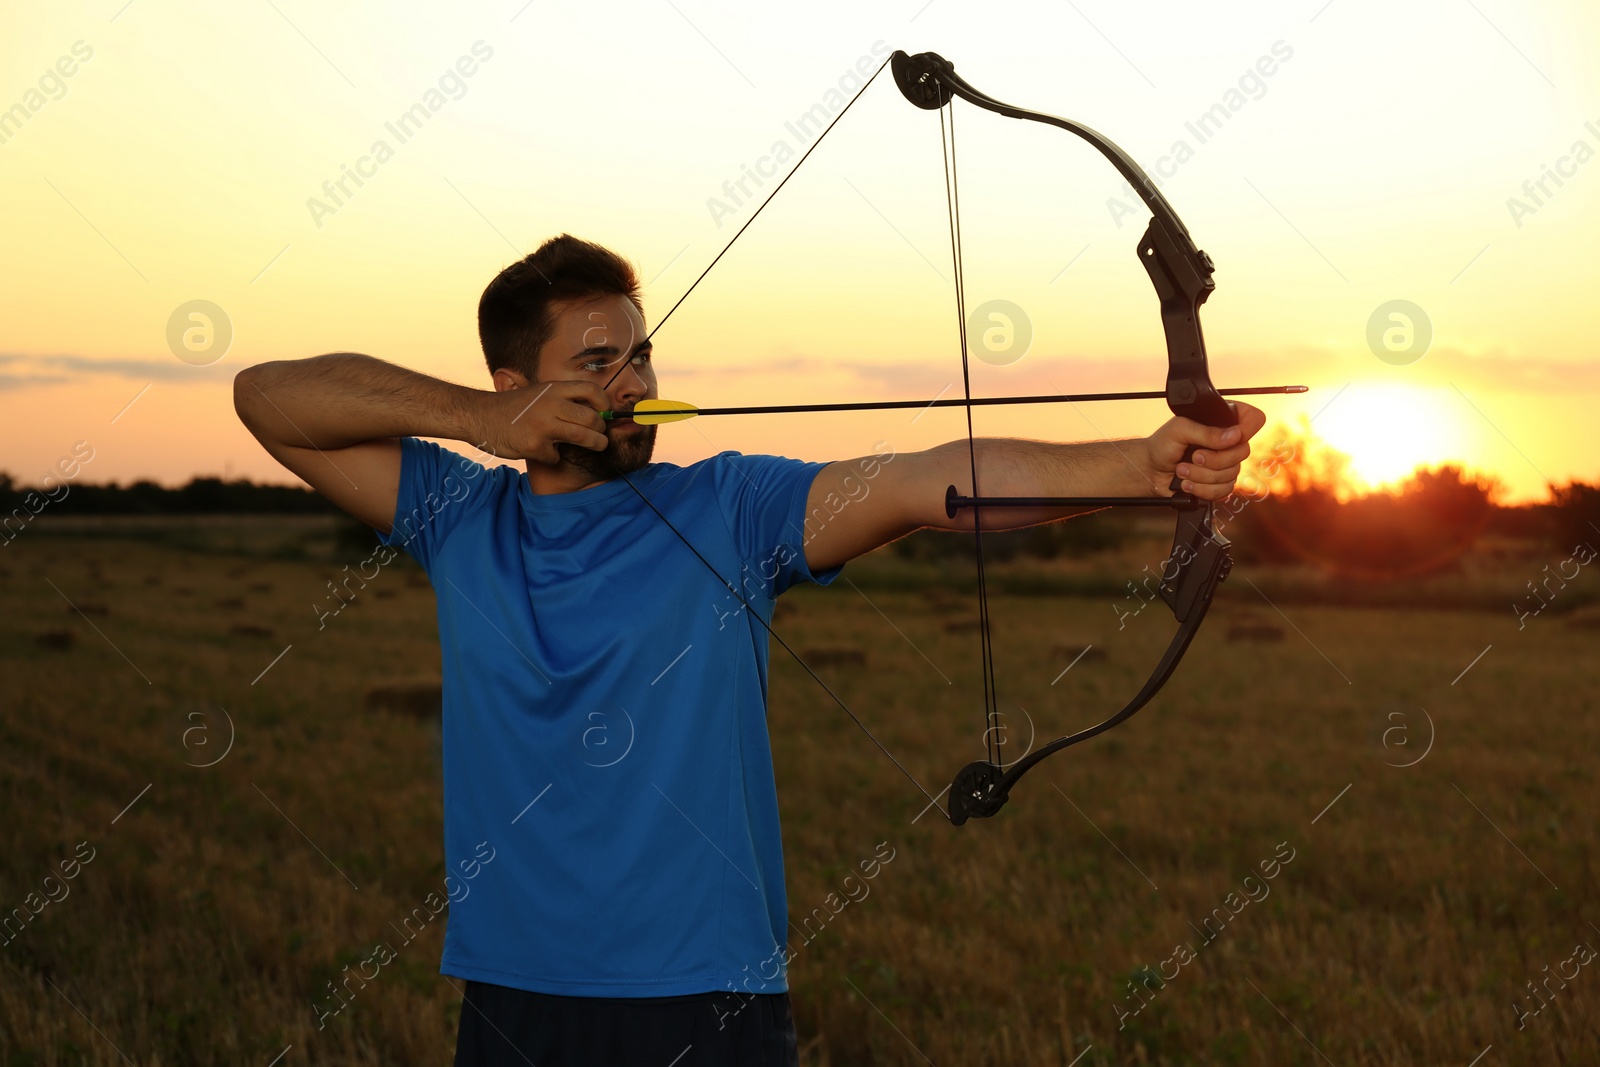 Photo of Man with bow and arrow practicing archery in field at sunset